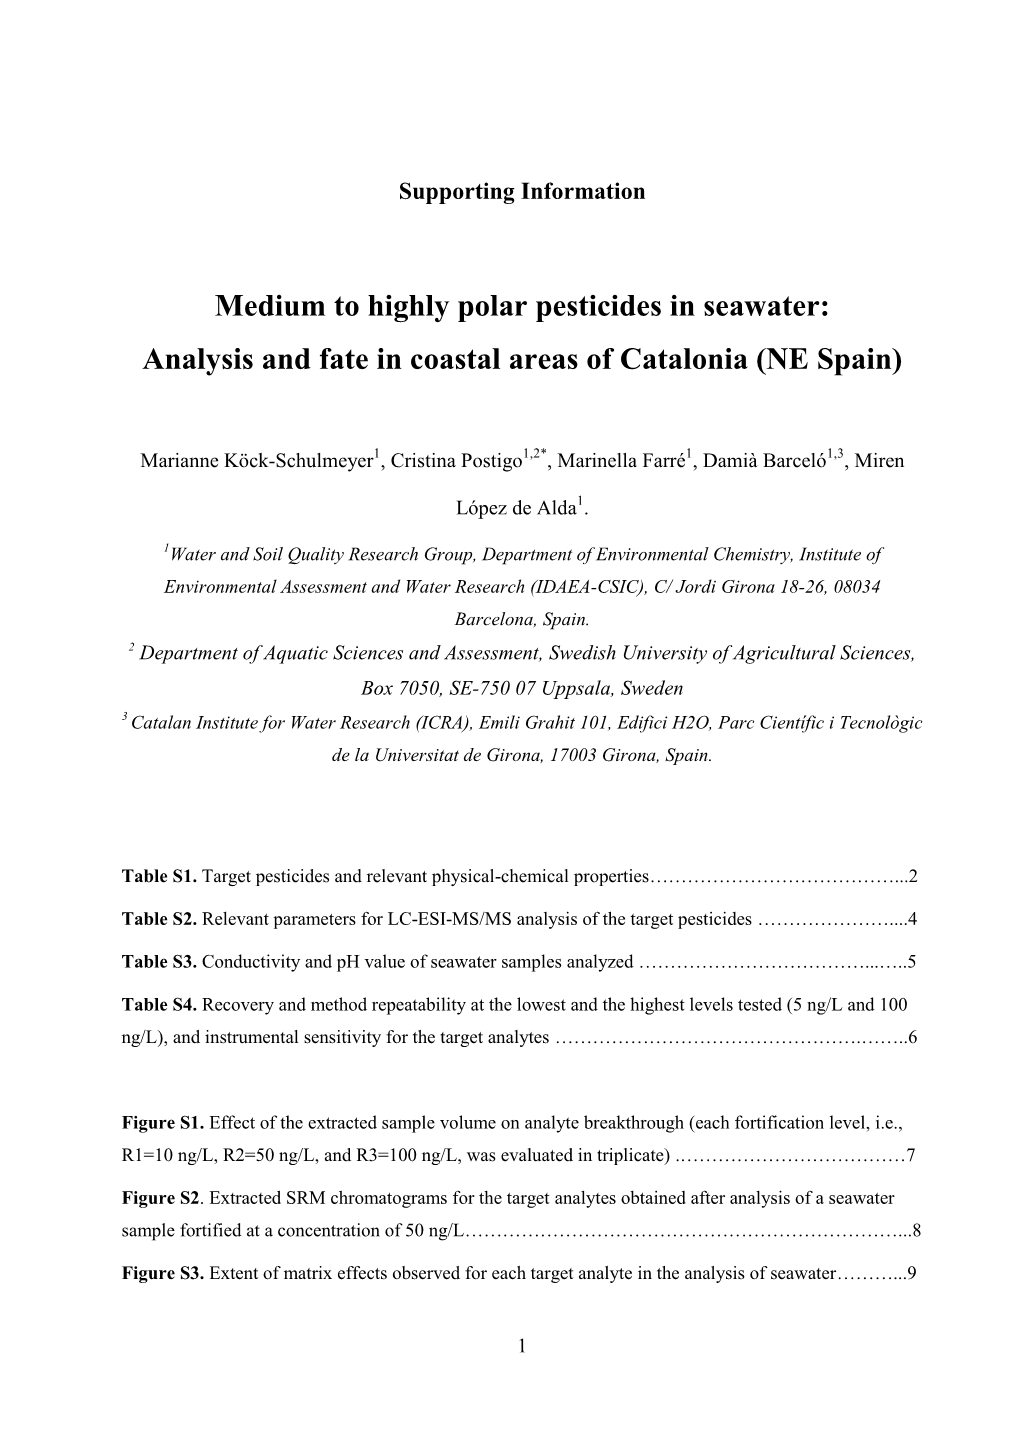 Medium to Highly Polar Pesticides in Seawater: Analysis and Fate in Coastal Areas of Catalonia (NE Spain)